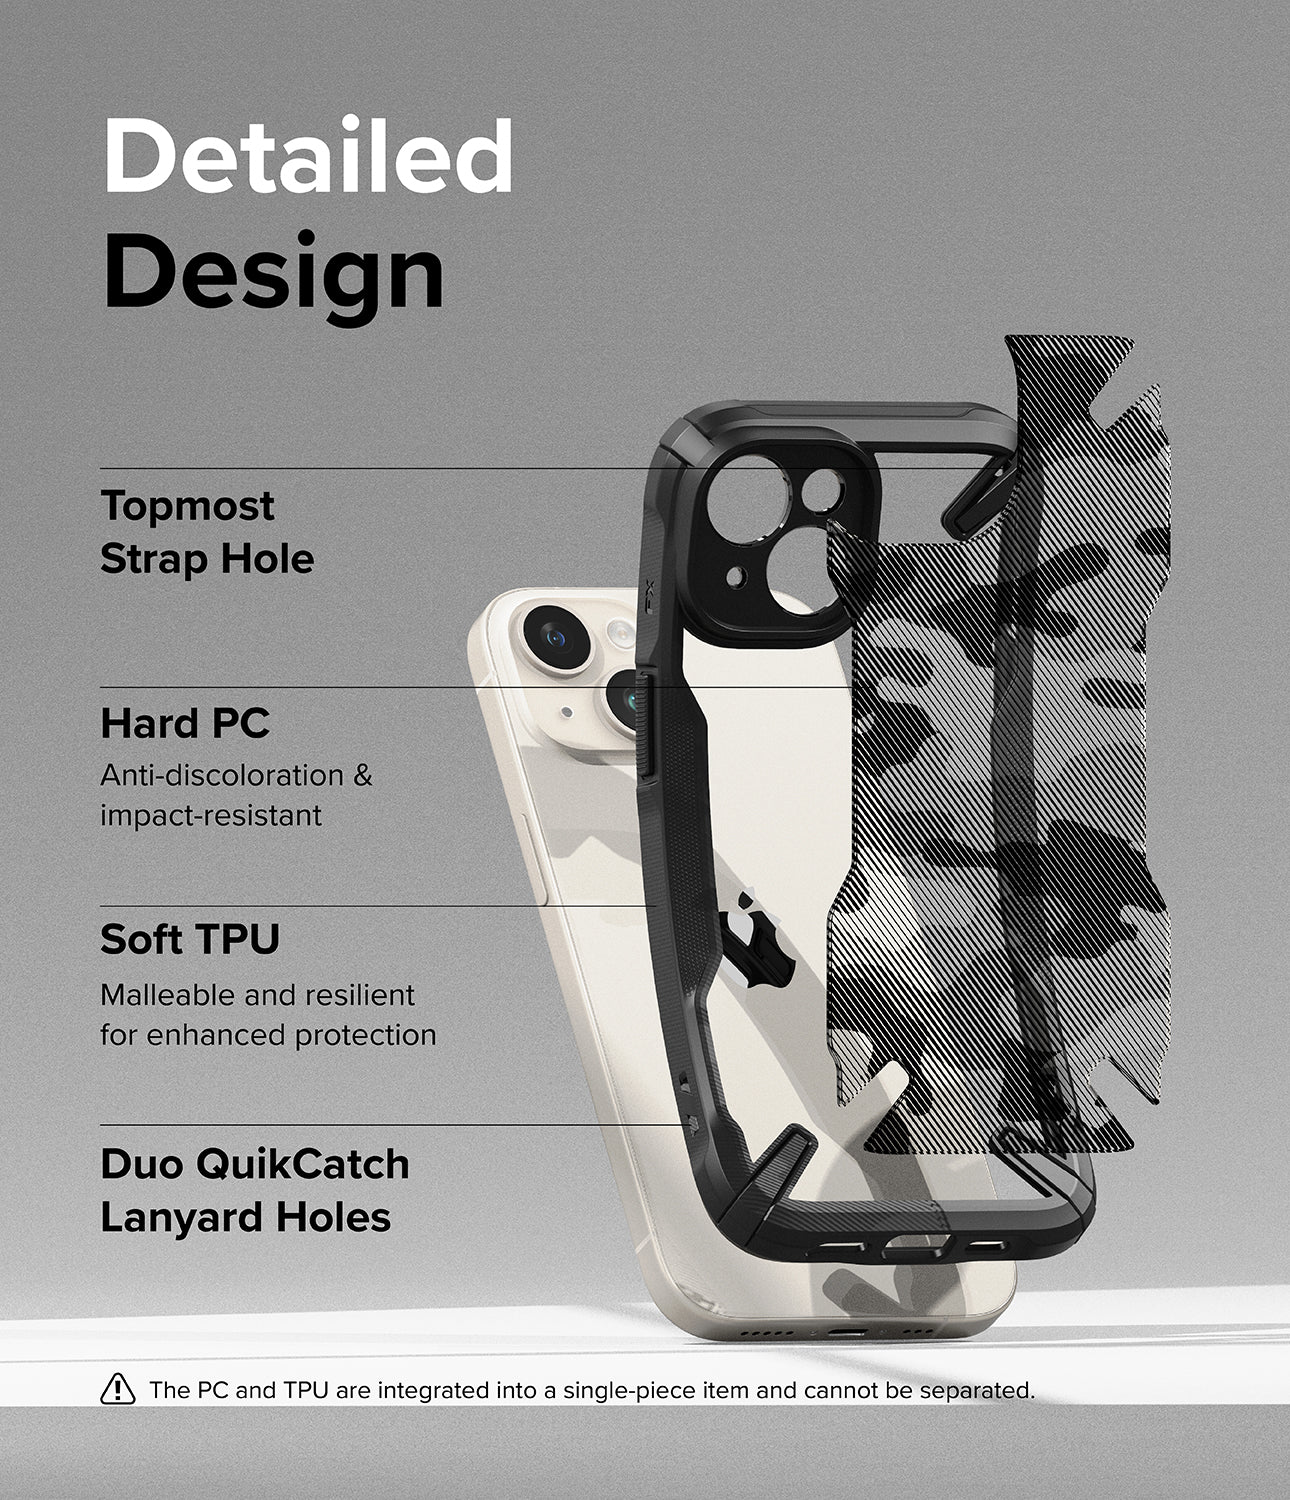 iPhone 15 Case | Fusion-X- Black - Detailed Design. Topmost Strap Hole. Anti-discoloration and impact-resistant with Hard PC. Malleable and resilient for enhanced protection with Soft TPU. Duo QuikCatch Lanyard Holes.